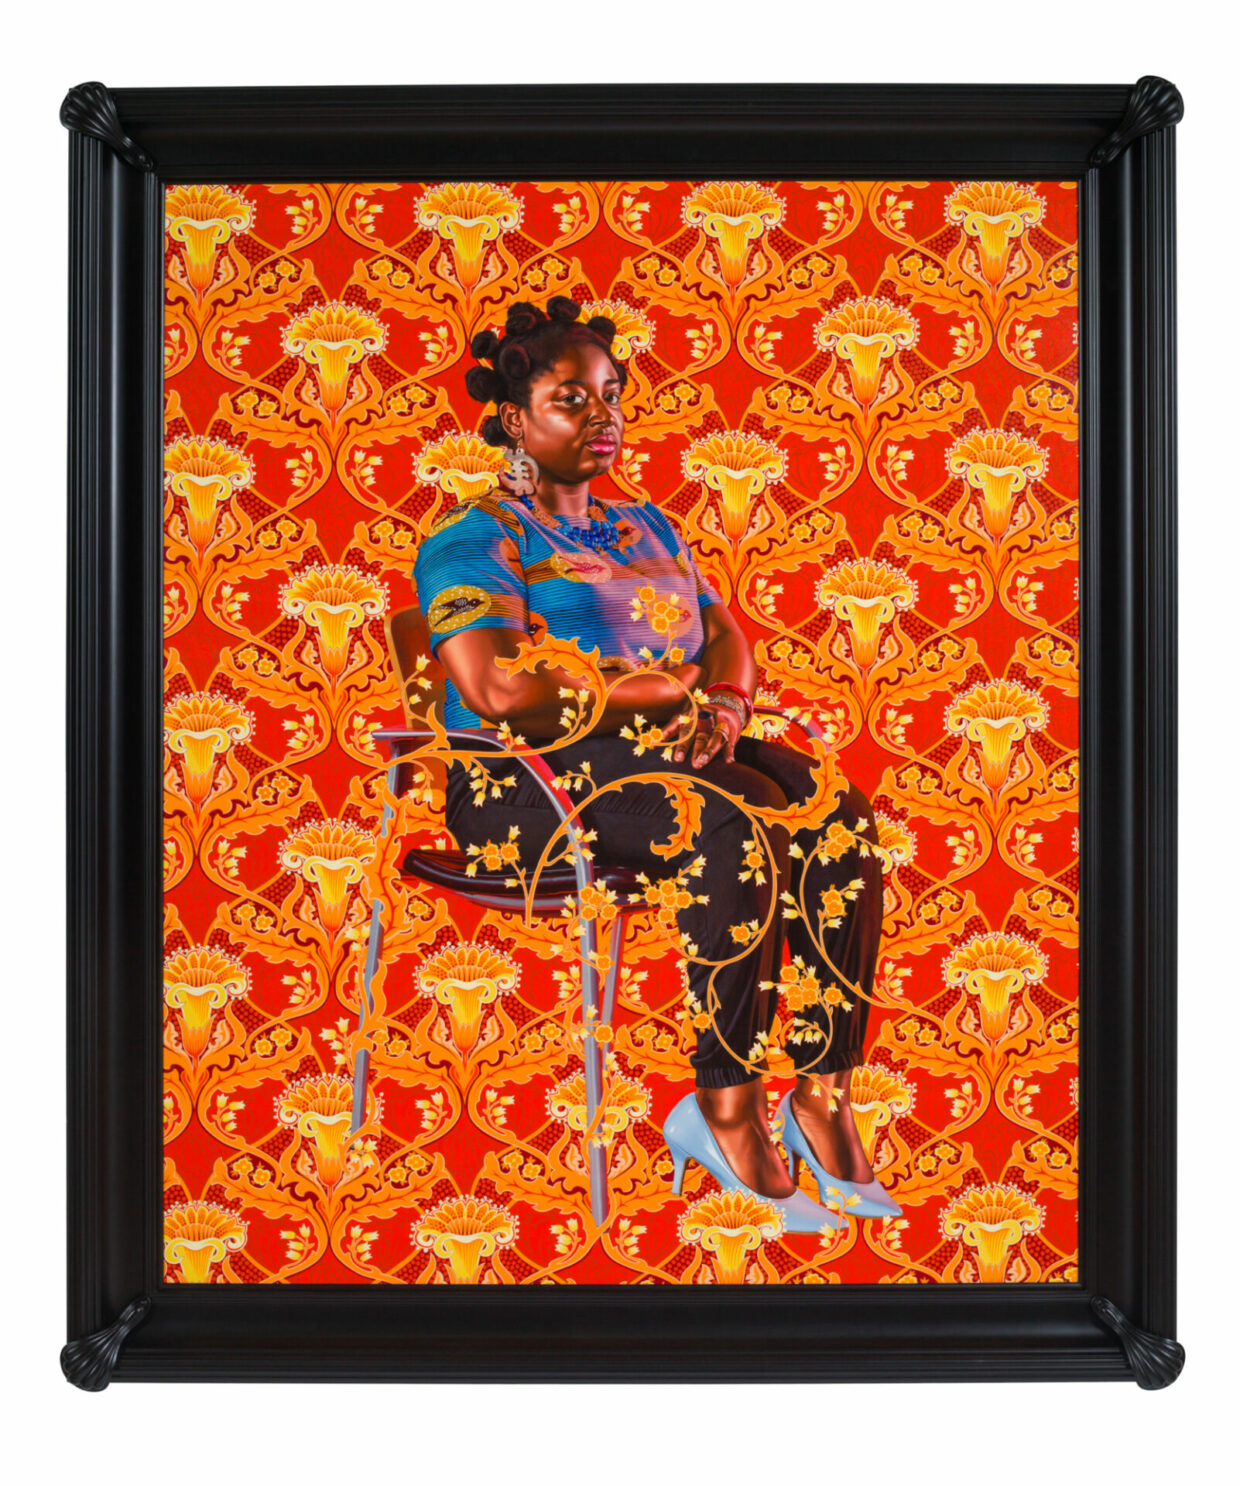 Kehinde Wiley: ‘When I first started painting black women, it was a return home’ | 10